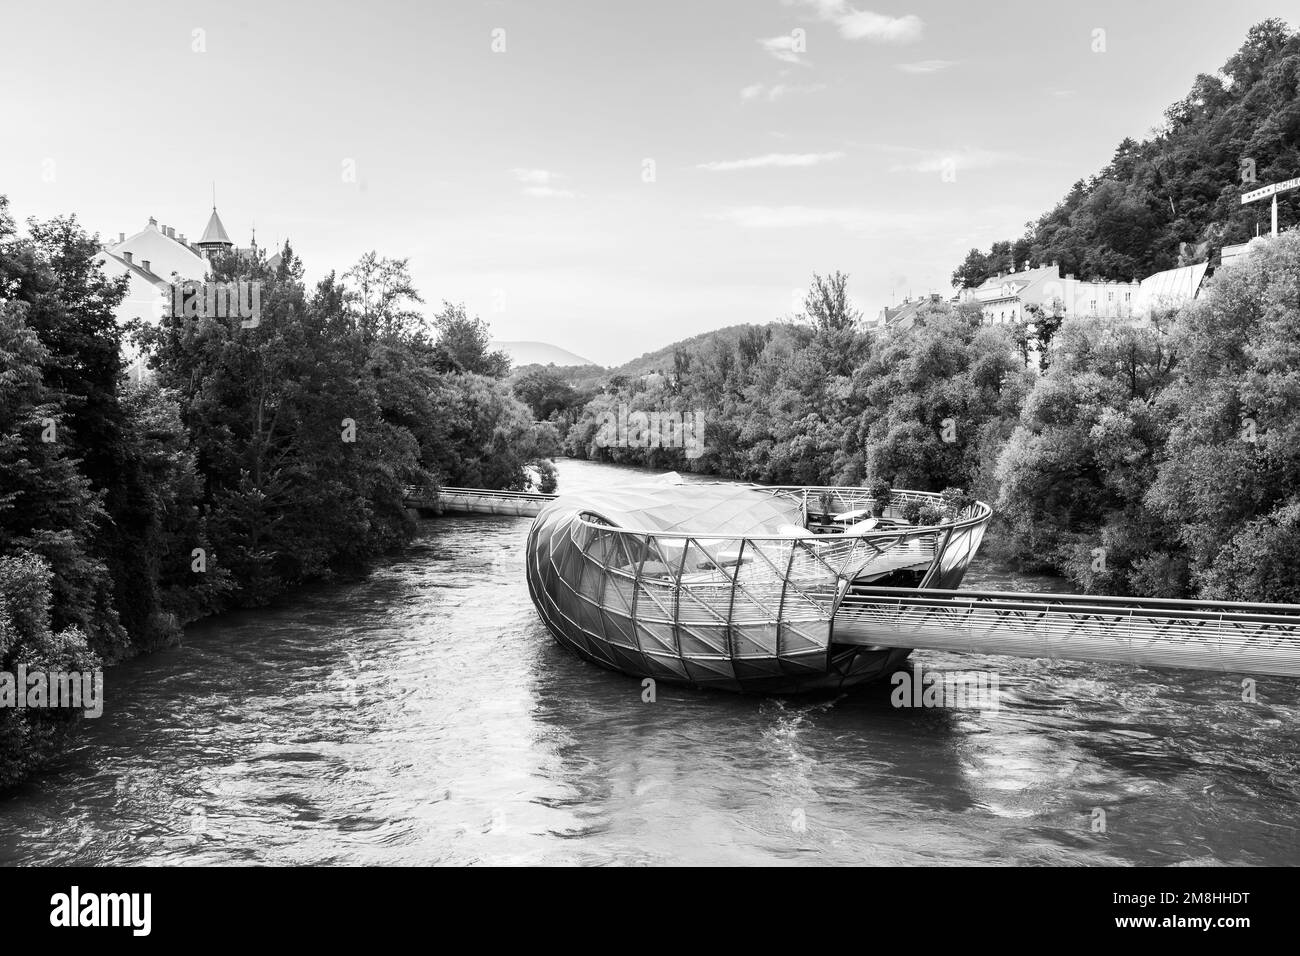 Murinsel, a manmade island in the River Mur, in Graz, Austria. Constructed of metal and glass, Italian design Stock Photo